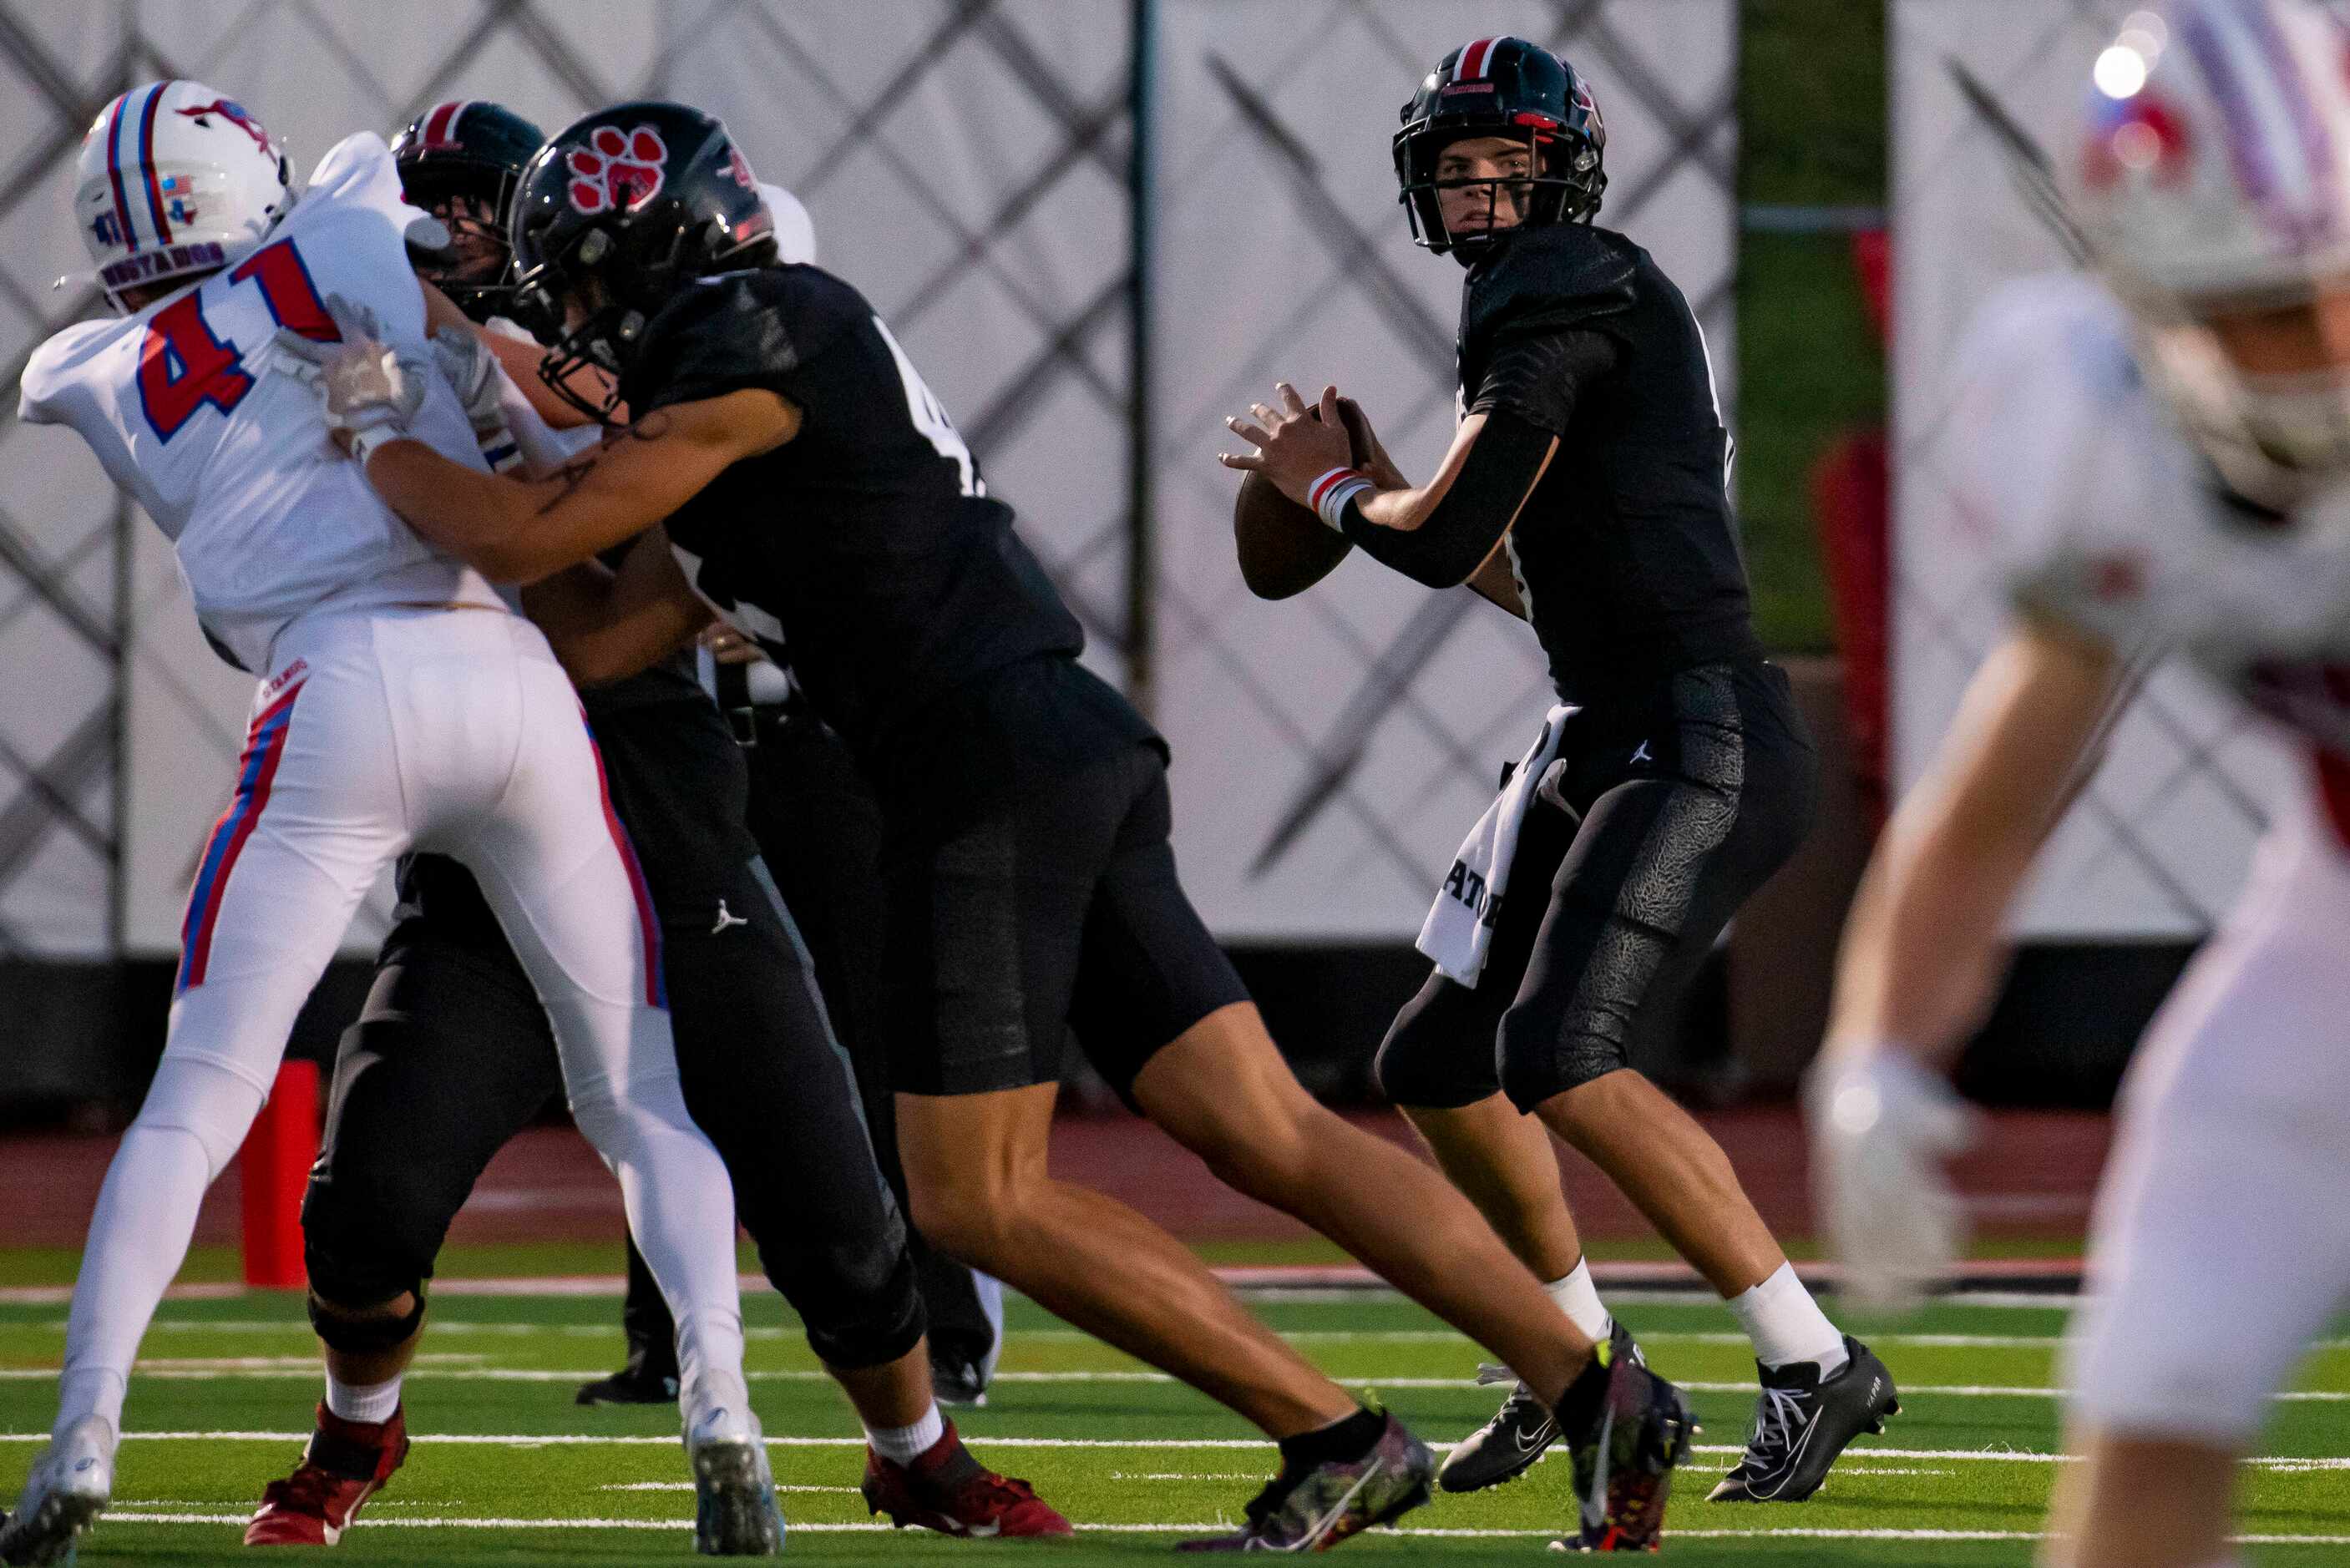 Colleyville senior Weston Smith (6) looks at a receiver down the field before throwing the...